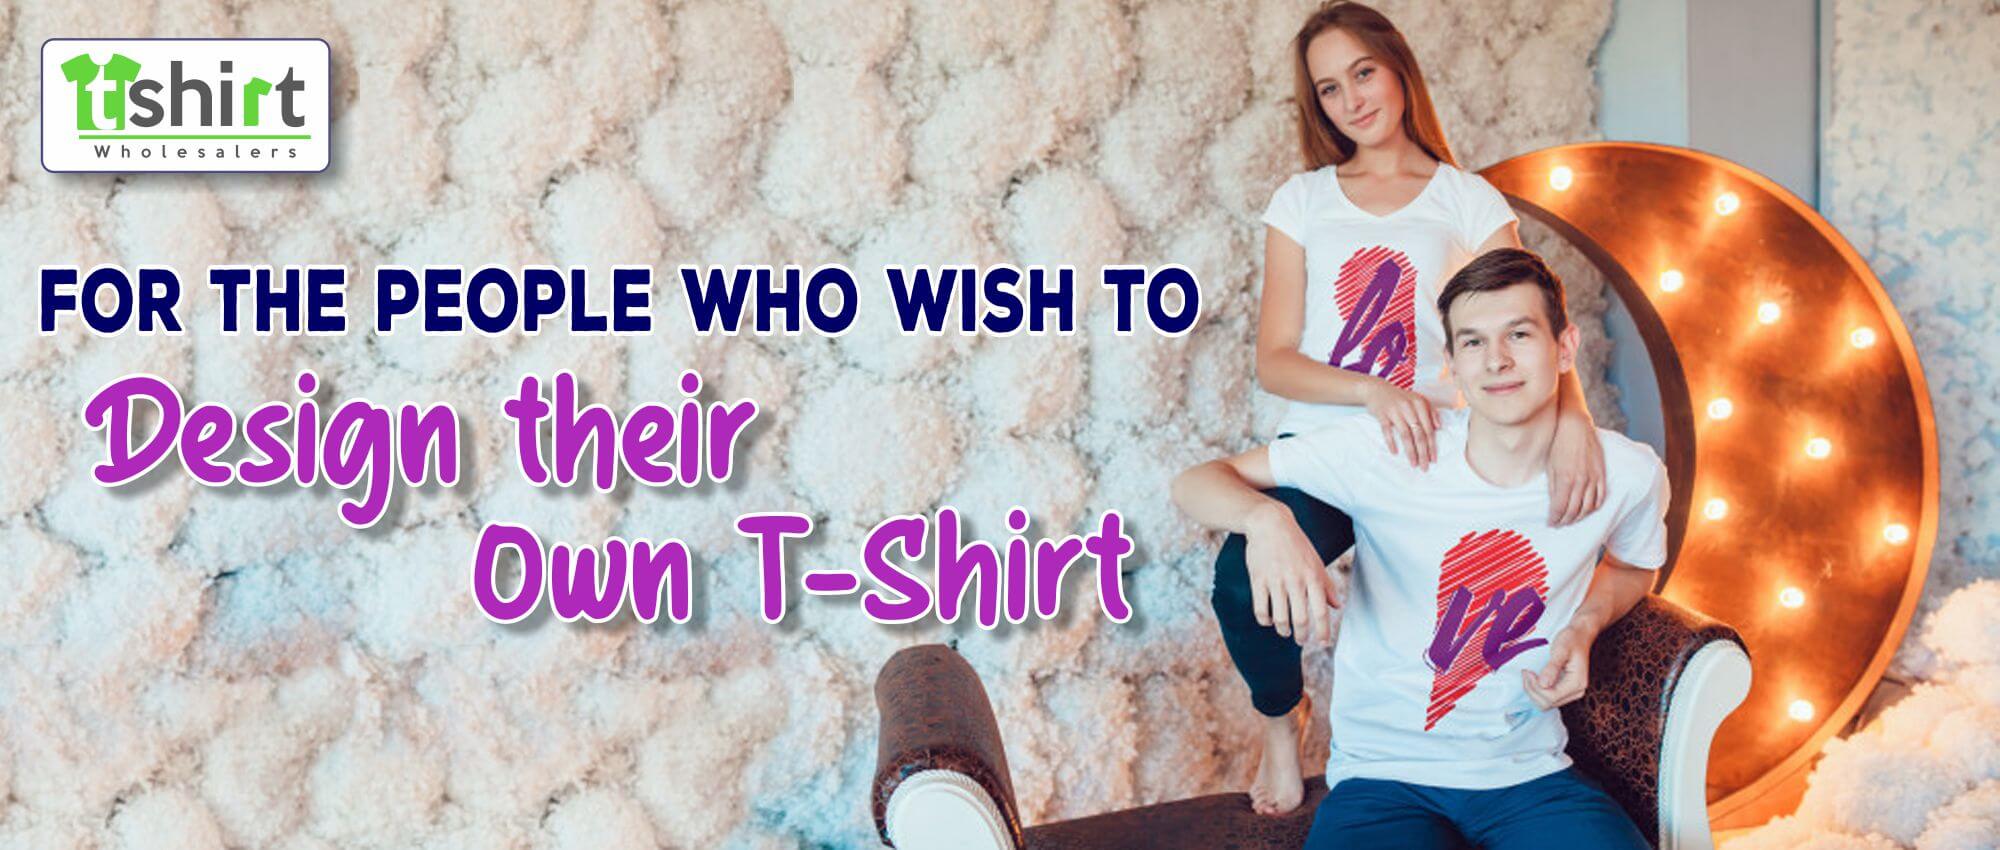 FOR THE PEOPLE WHO WISH TO DESIGN THEIR OWN T-SHIRTS